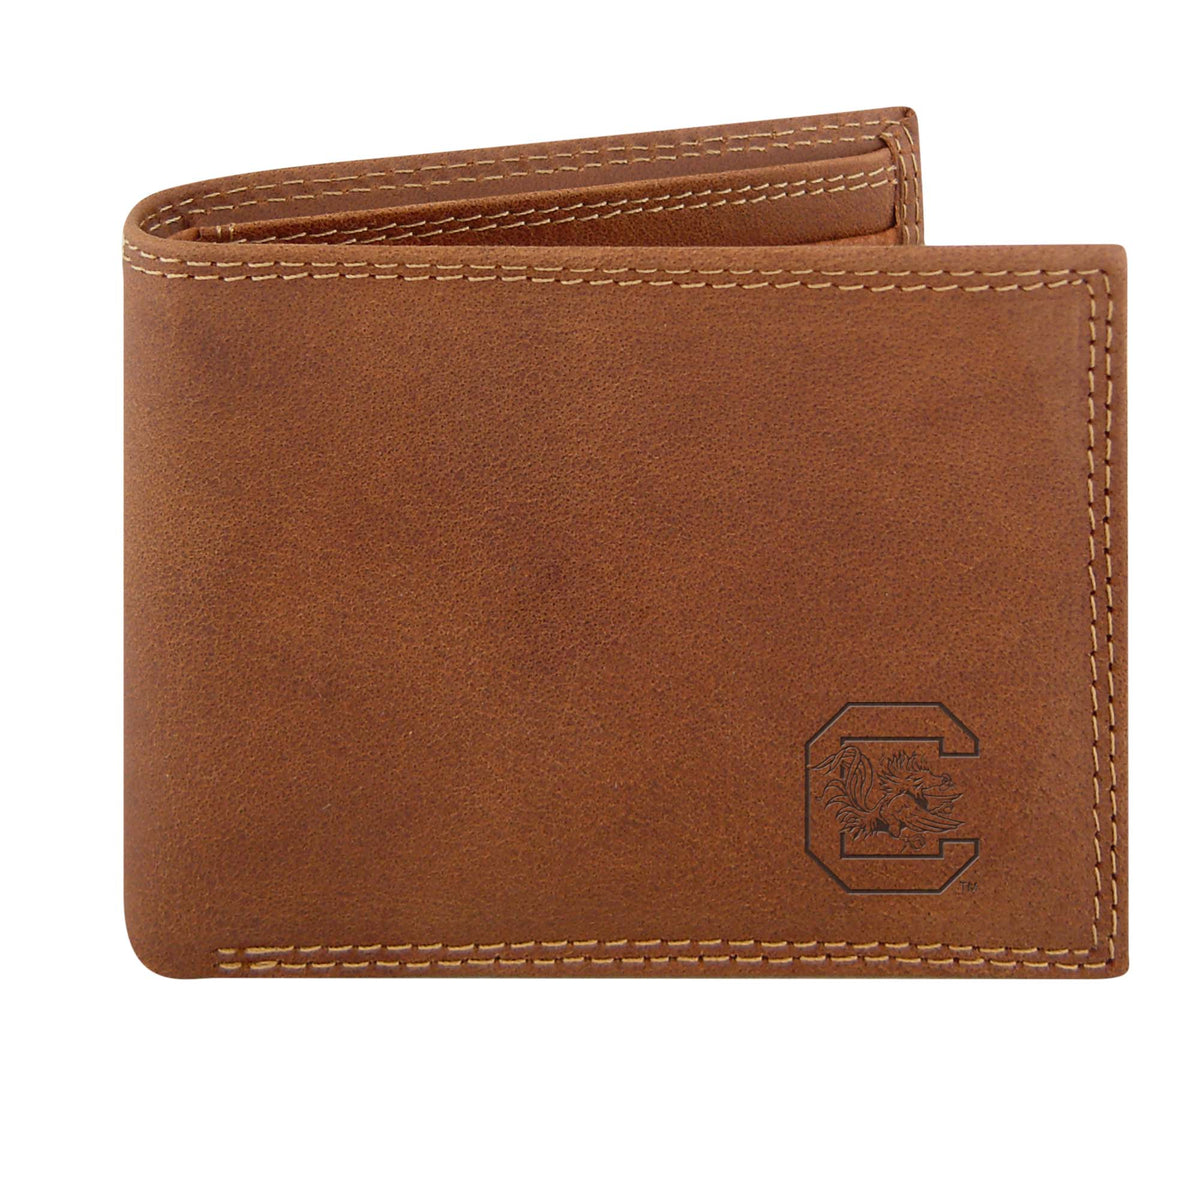 USC Embossed Leather Bifold